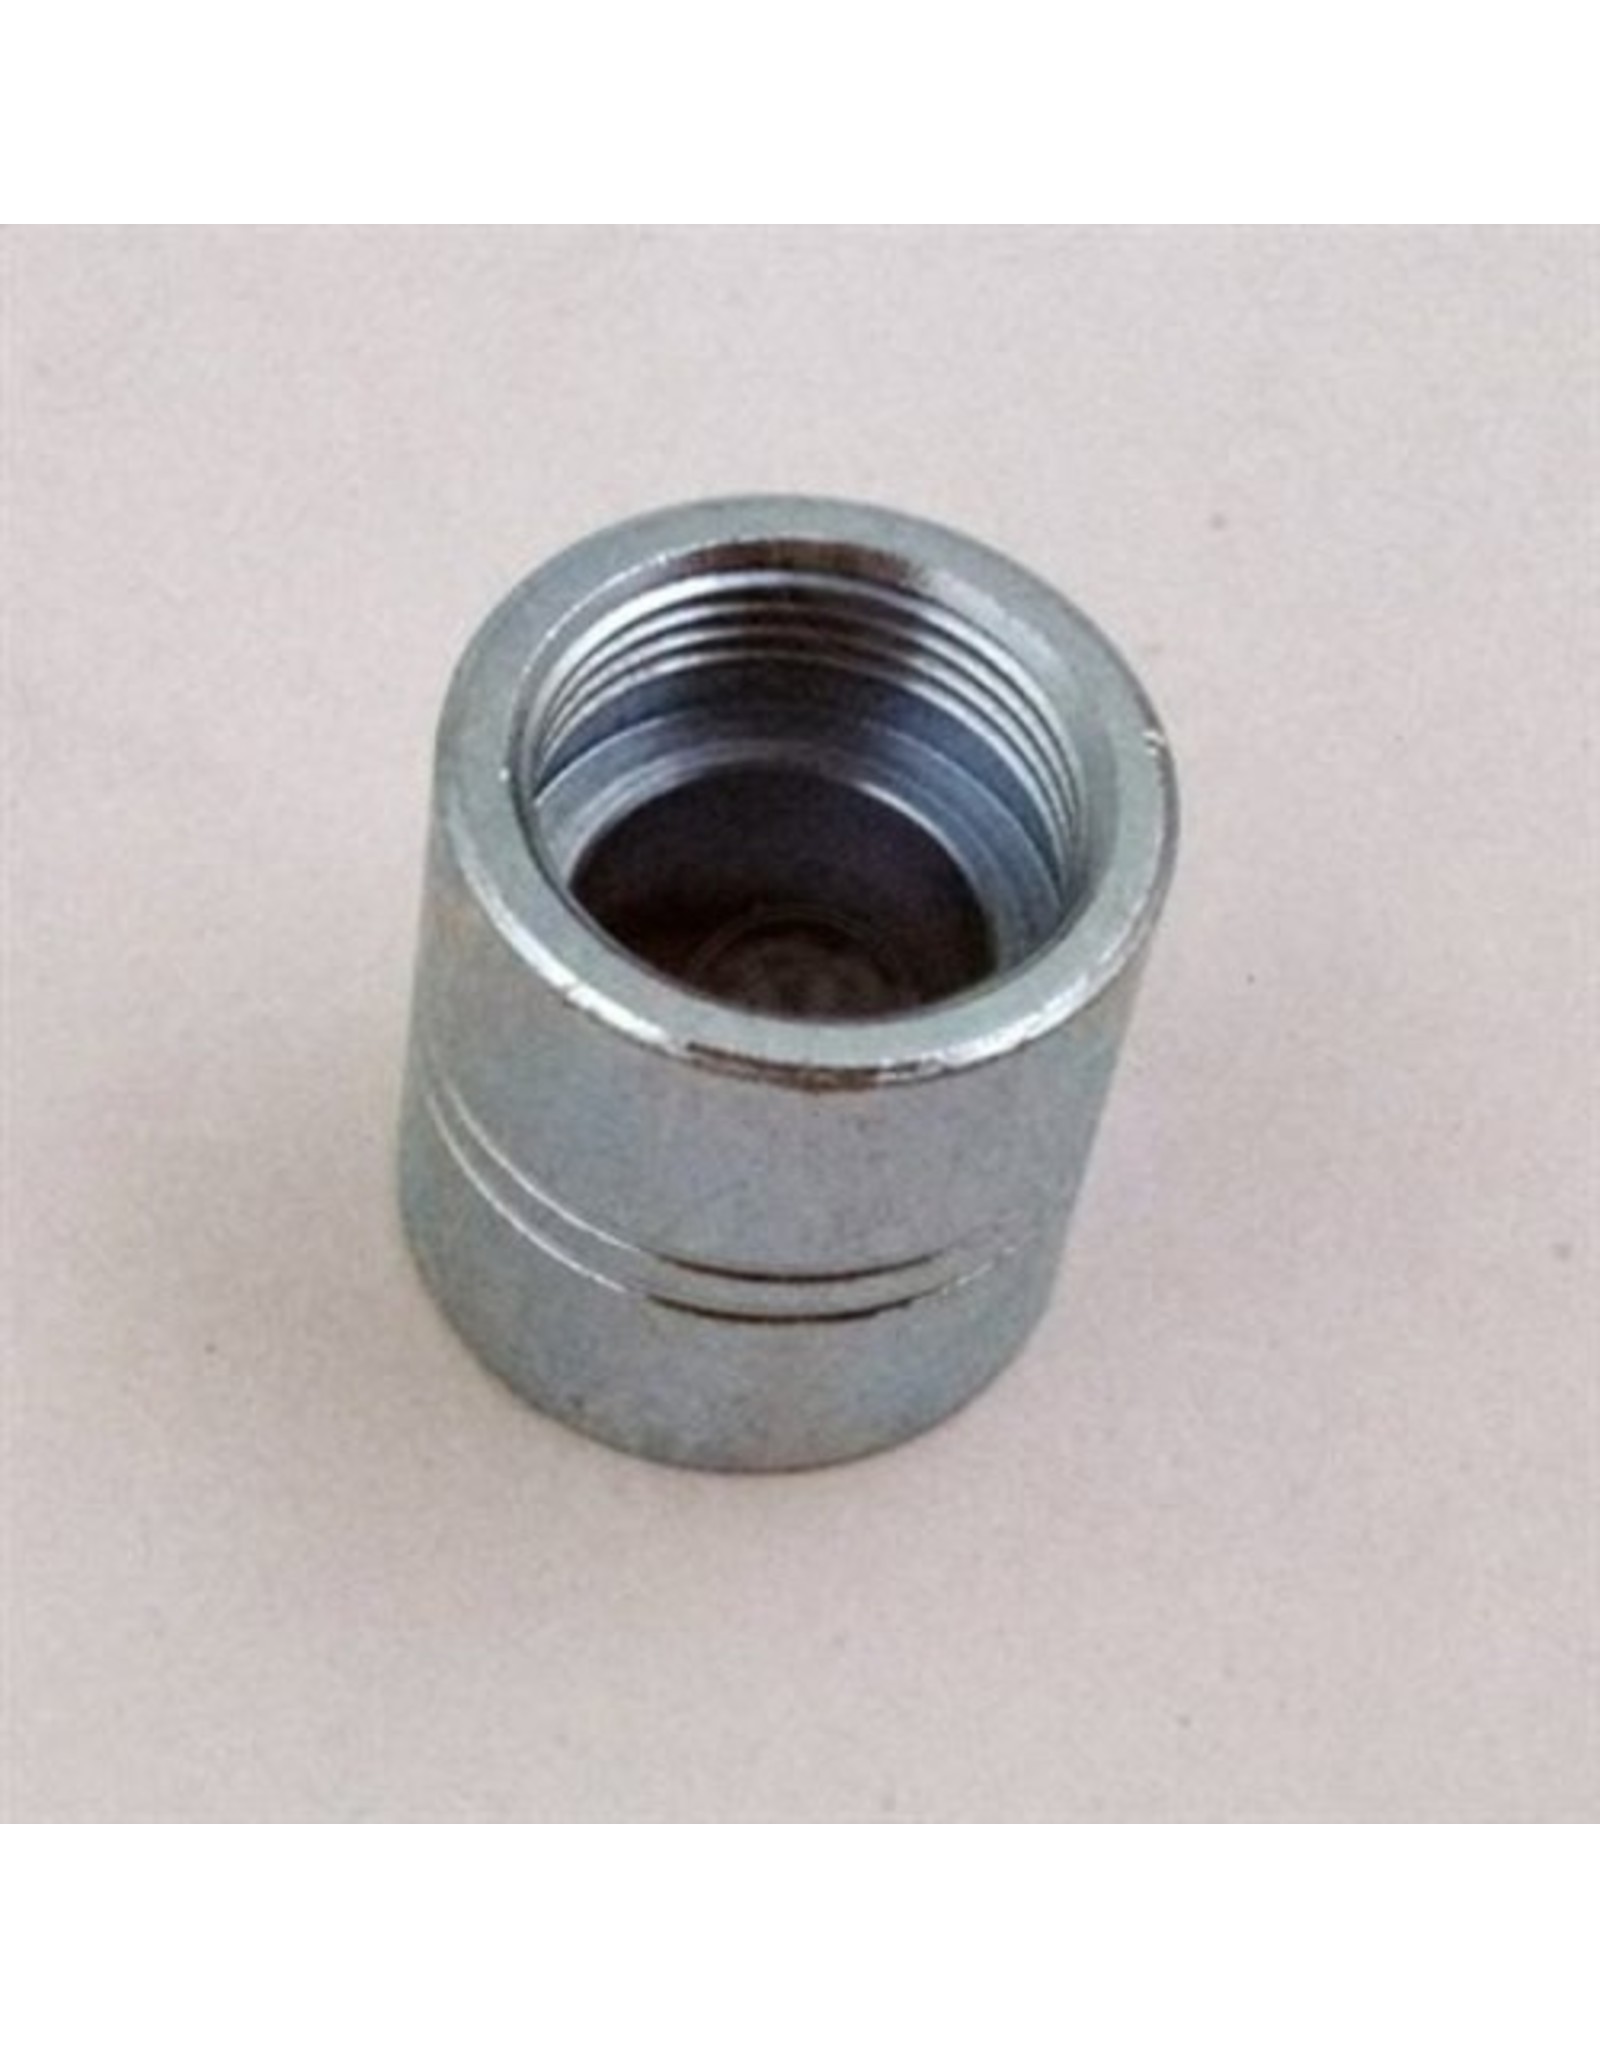 Capping Bell, 29 mm for Professional Heavy Duty Capper